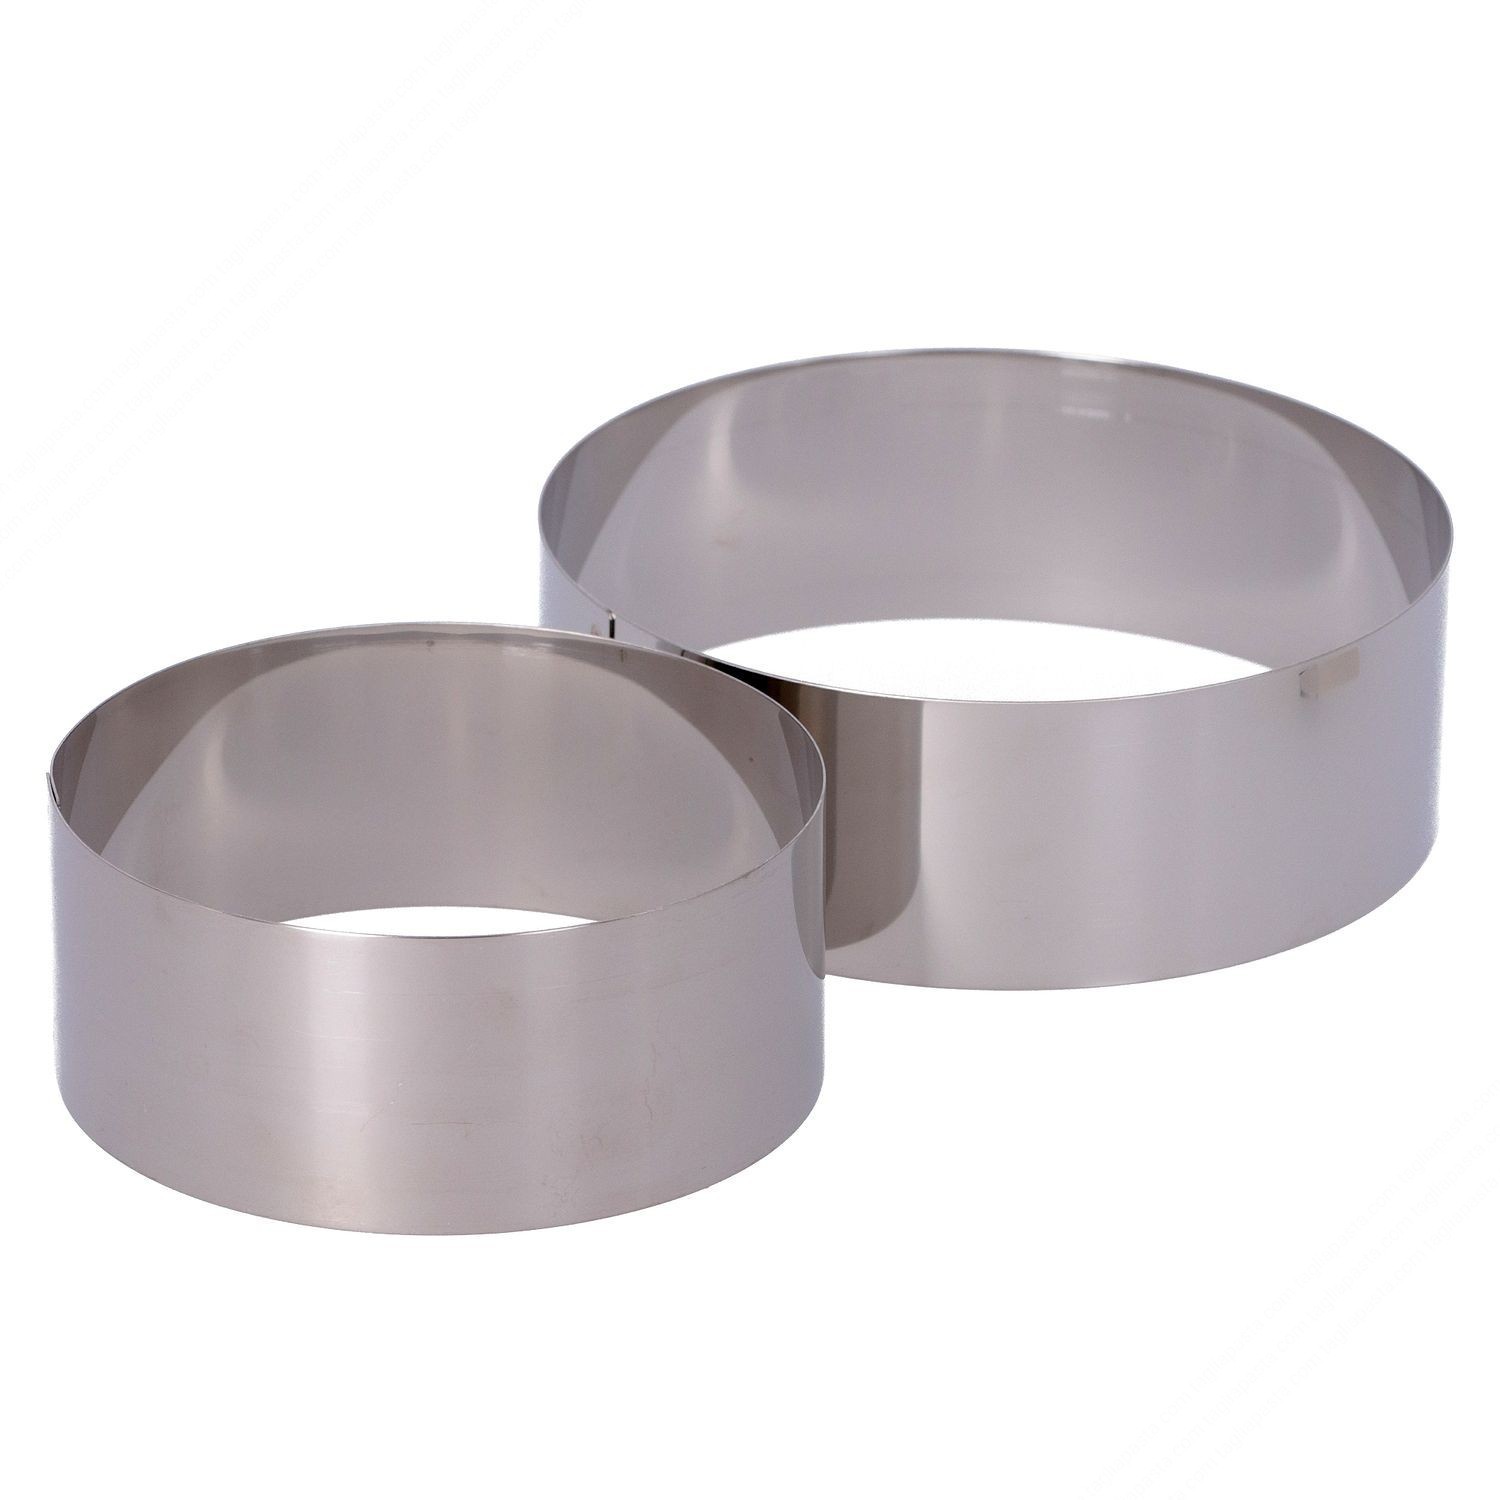 2 Stainless Steel Round Ring